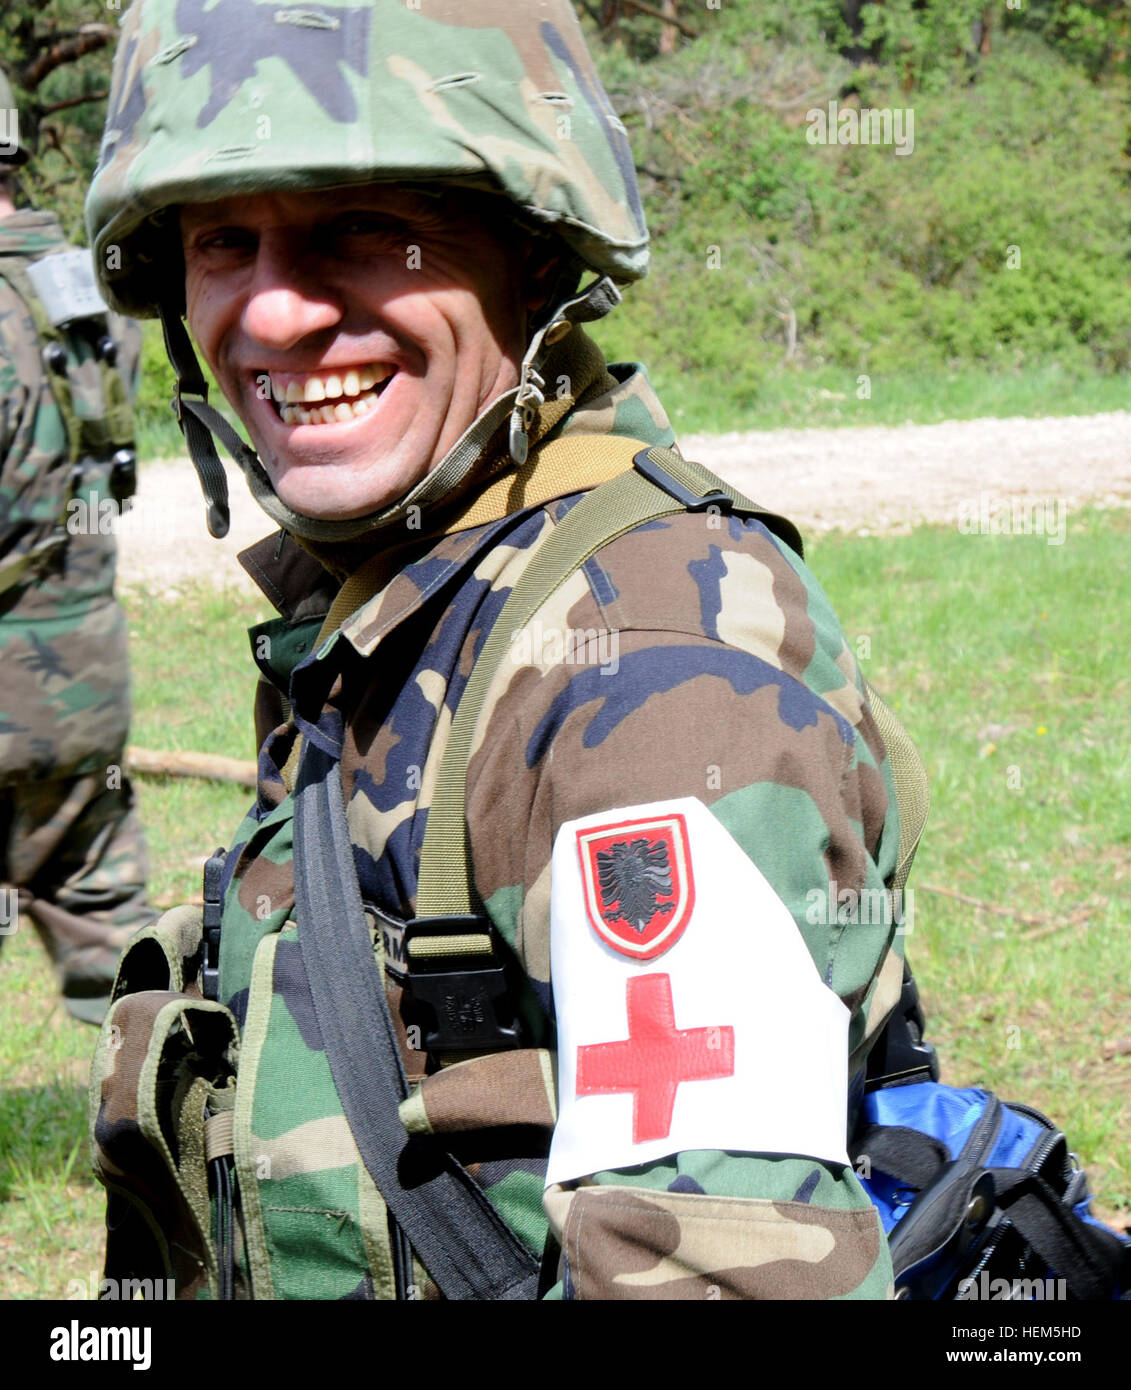 An Albanian soldier, replicating an Afghan National Army soldier, smiles after recieving a compliment during medical evacuation training at the Joint Multinational Readiness Center in Hohenfels, Germany, May 7, 2012.  Operational Mentor Liaison Team XXIII and Police Operational Mentor Liaison Team VII training are designed to prepare teams for deployment to Afghanistan with the ability to train, advise, and enable the Afghan National Security Force in areas such as counter-insurgency, combat advisory, and force enabling support operations.  (U.S. Army photo by Spc. Fredrick J. WIllis Jr./Not R Stock Photo